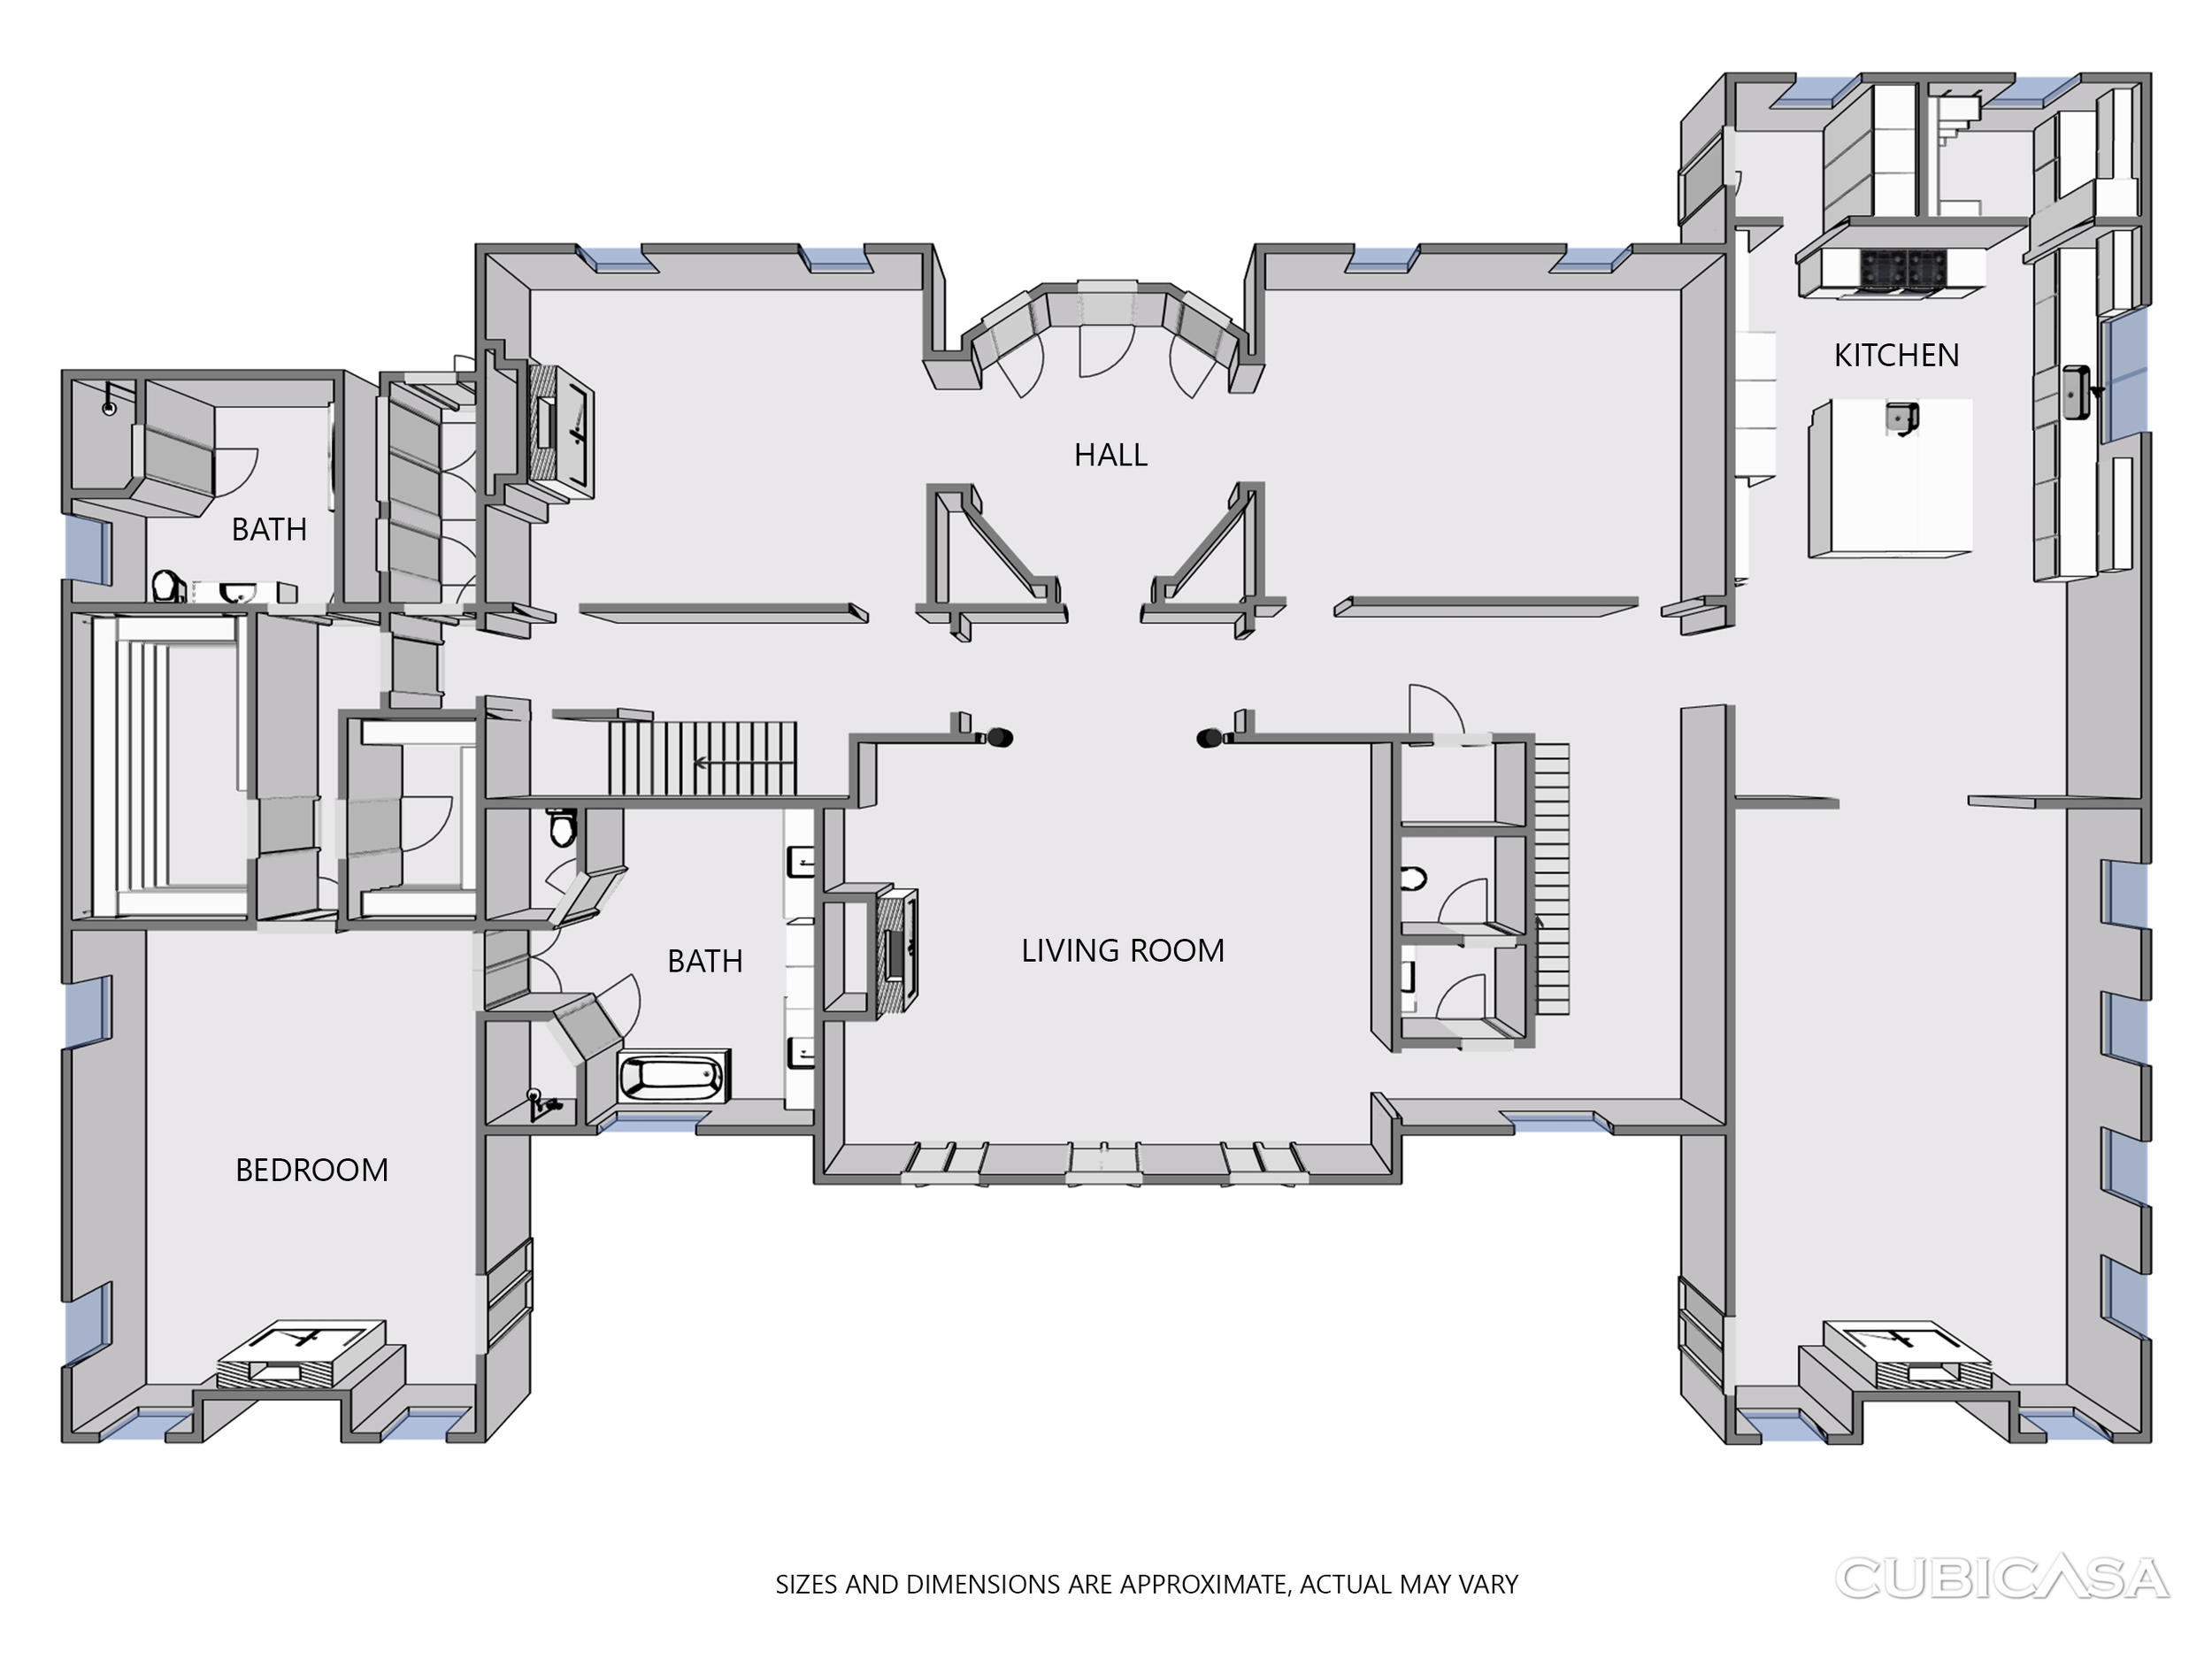 202-Main-3D Unfurnised-Top-No Perspective-We Get Around CubiCasa Luxury Residential Real Estate Example.jpg